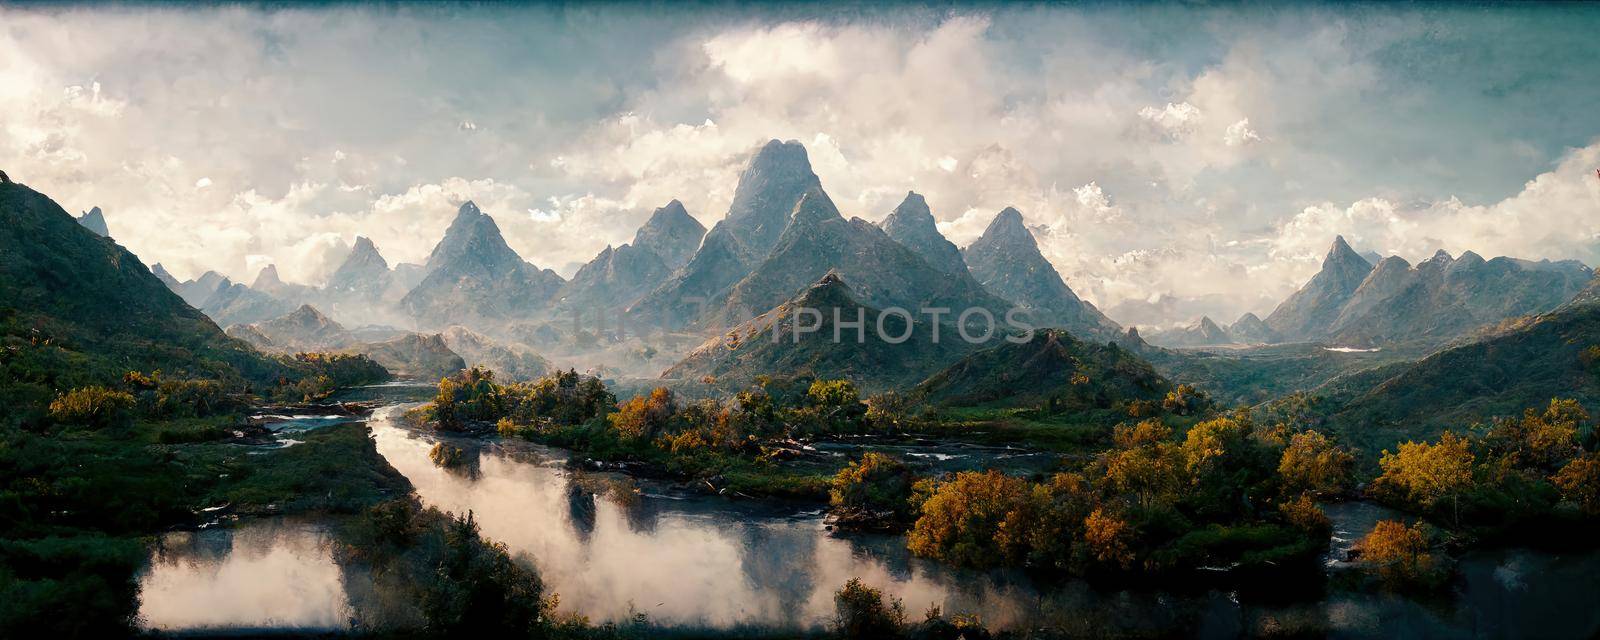 fairy tale valley in fantasy style with a wide river and mountains.